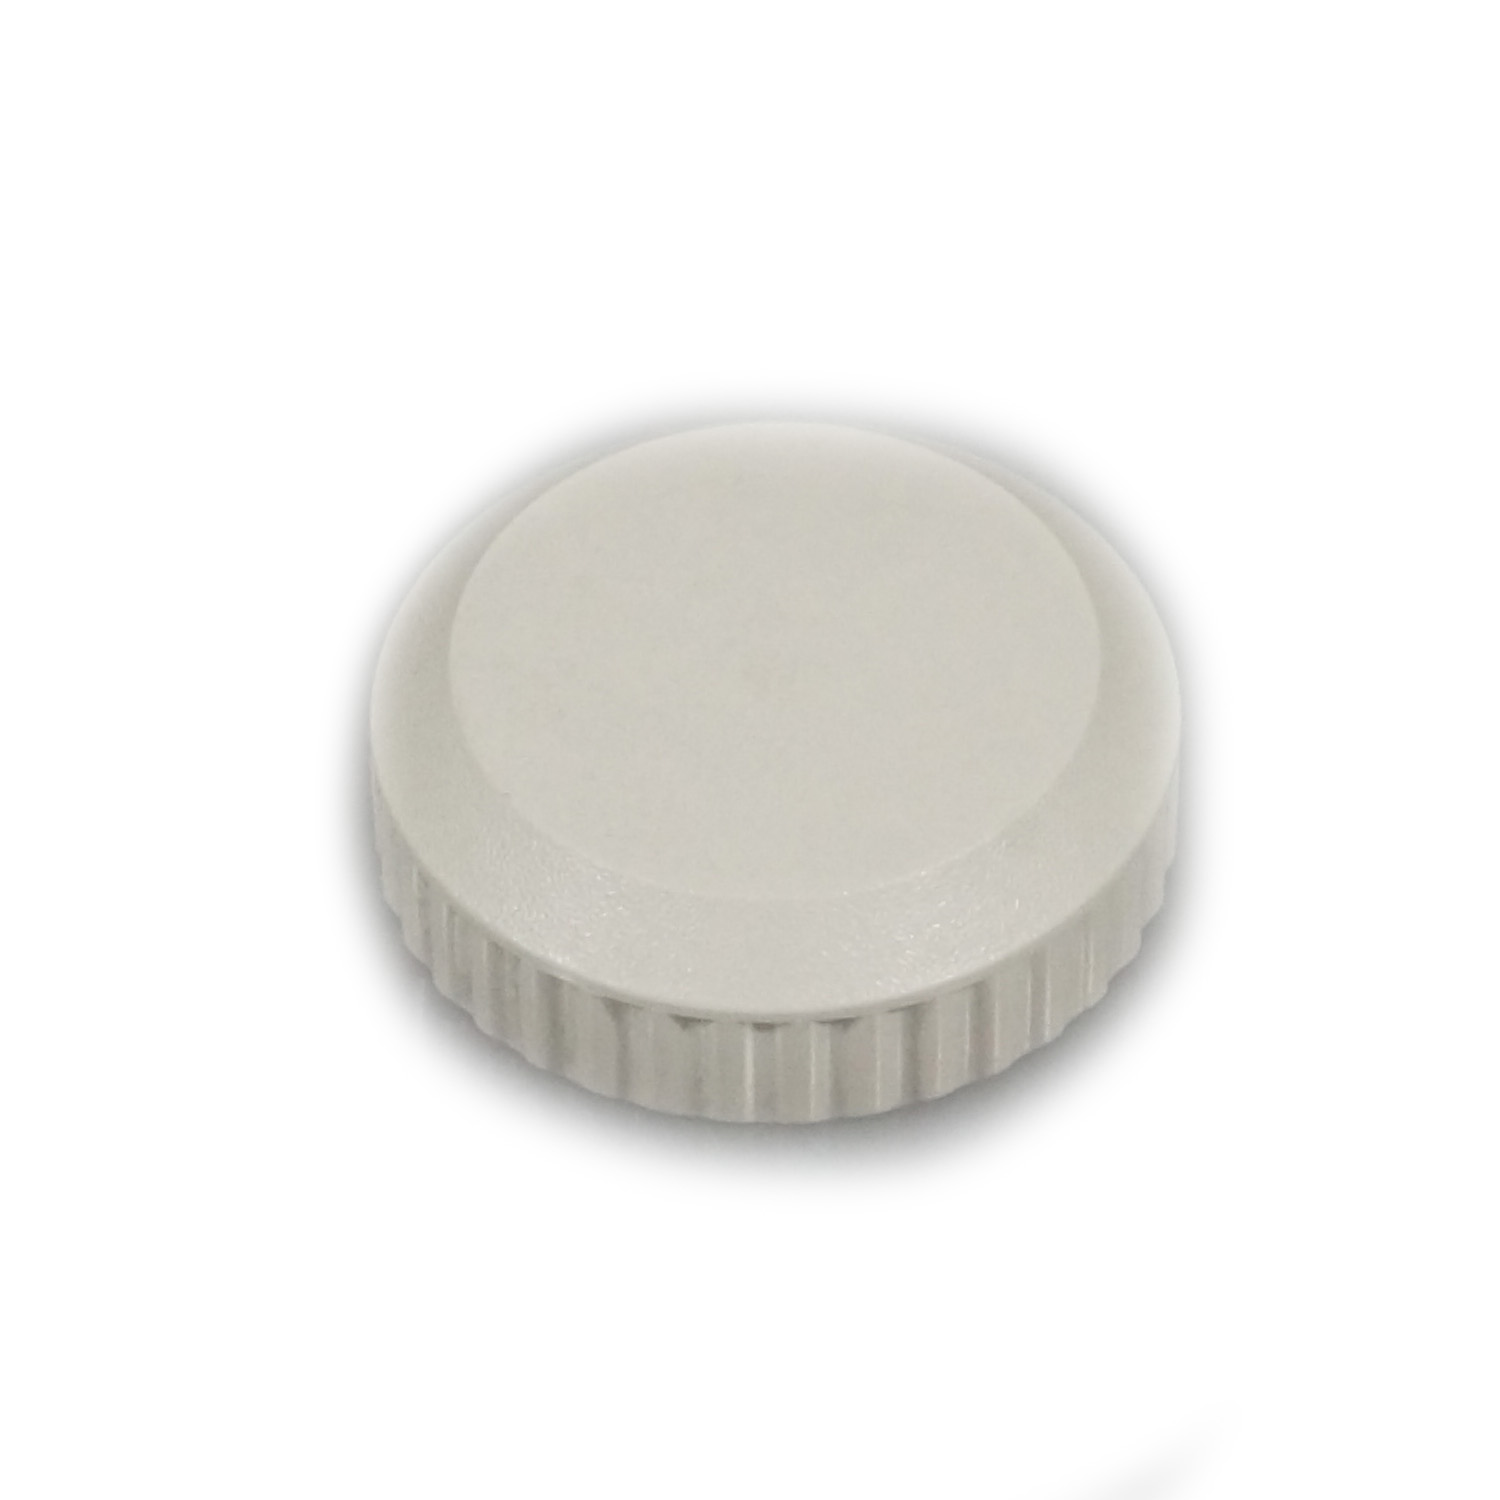 Whirlpool Washer White Control Knob. Part #W10801656 is NO LONGER AVAILABLE